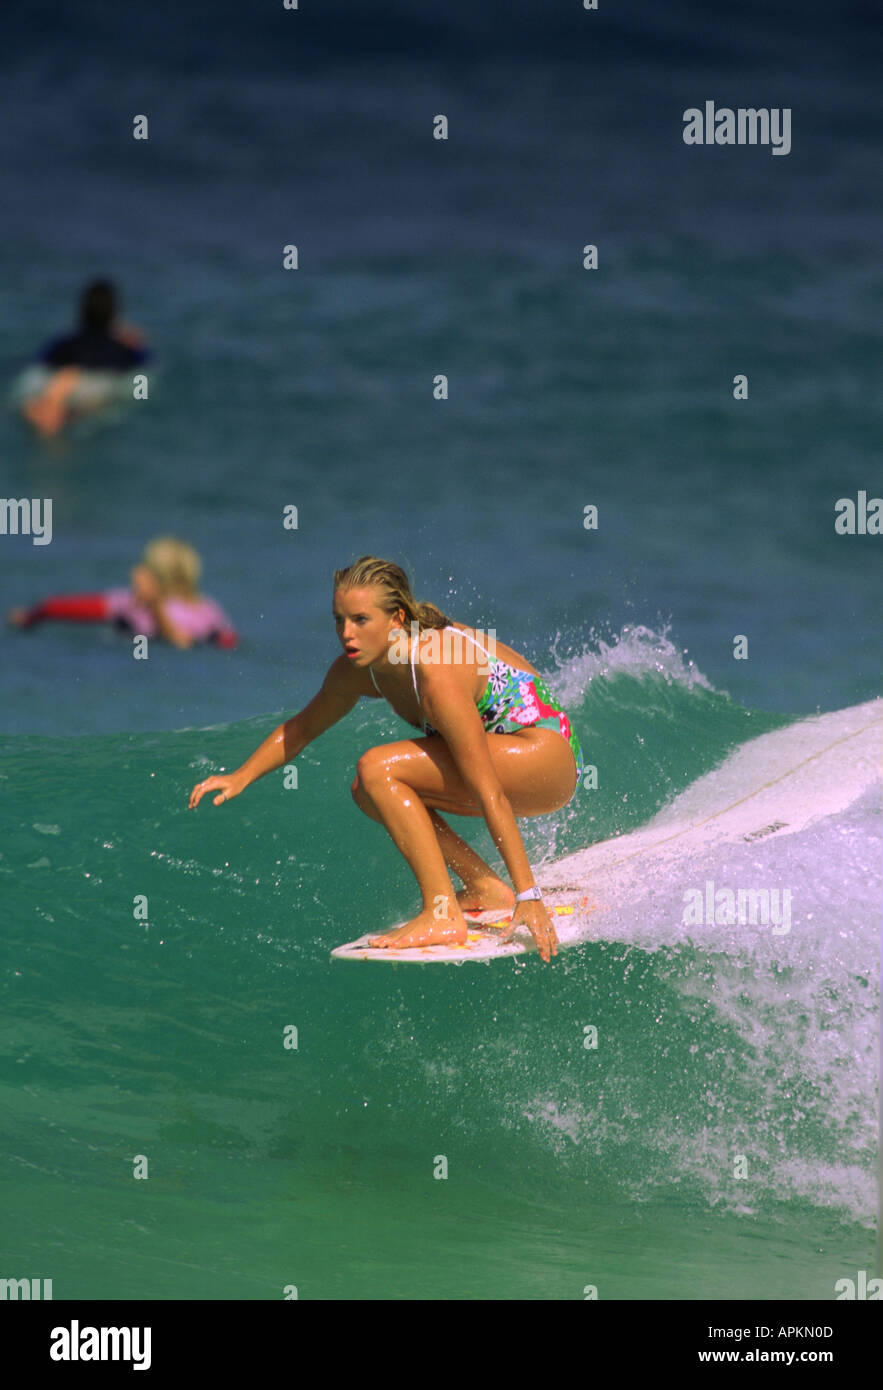 FEMALE SURFING ACTION Stock Photo